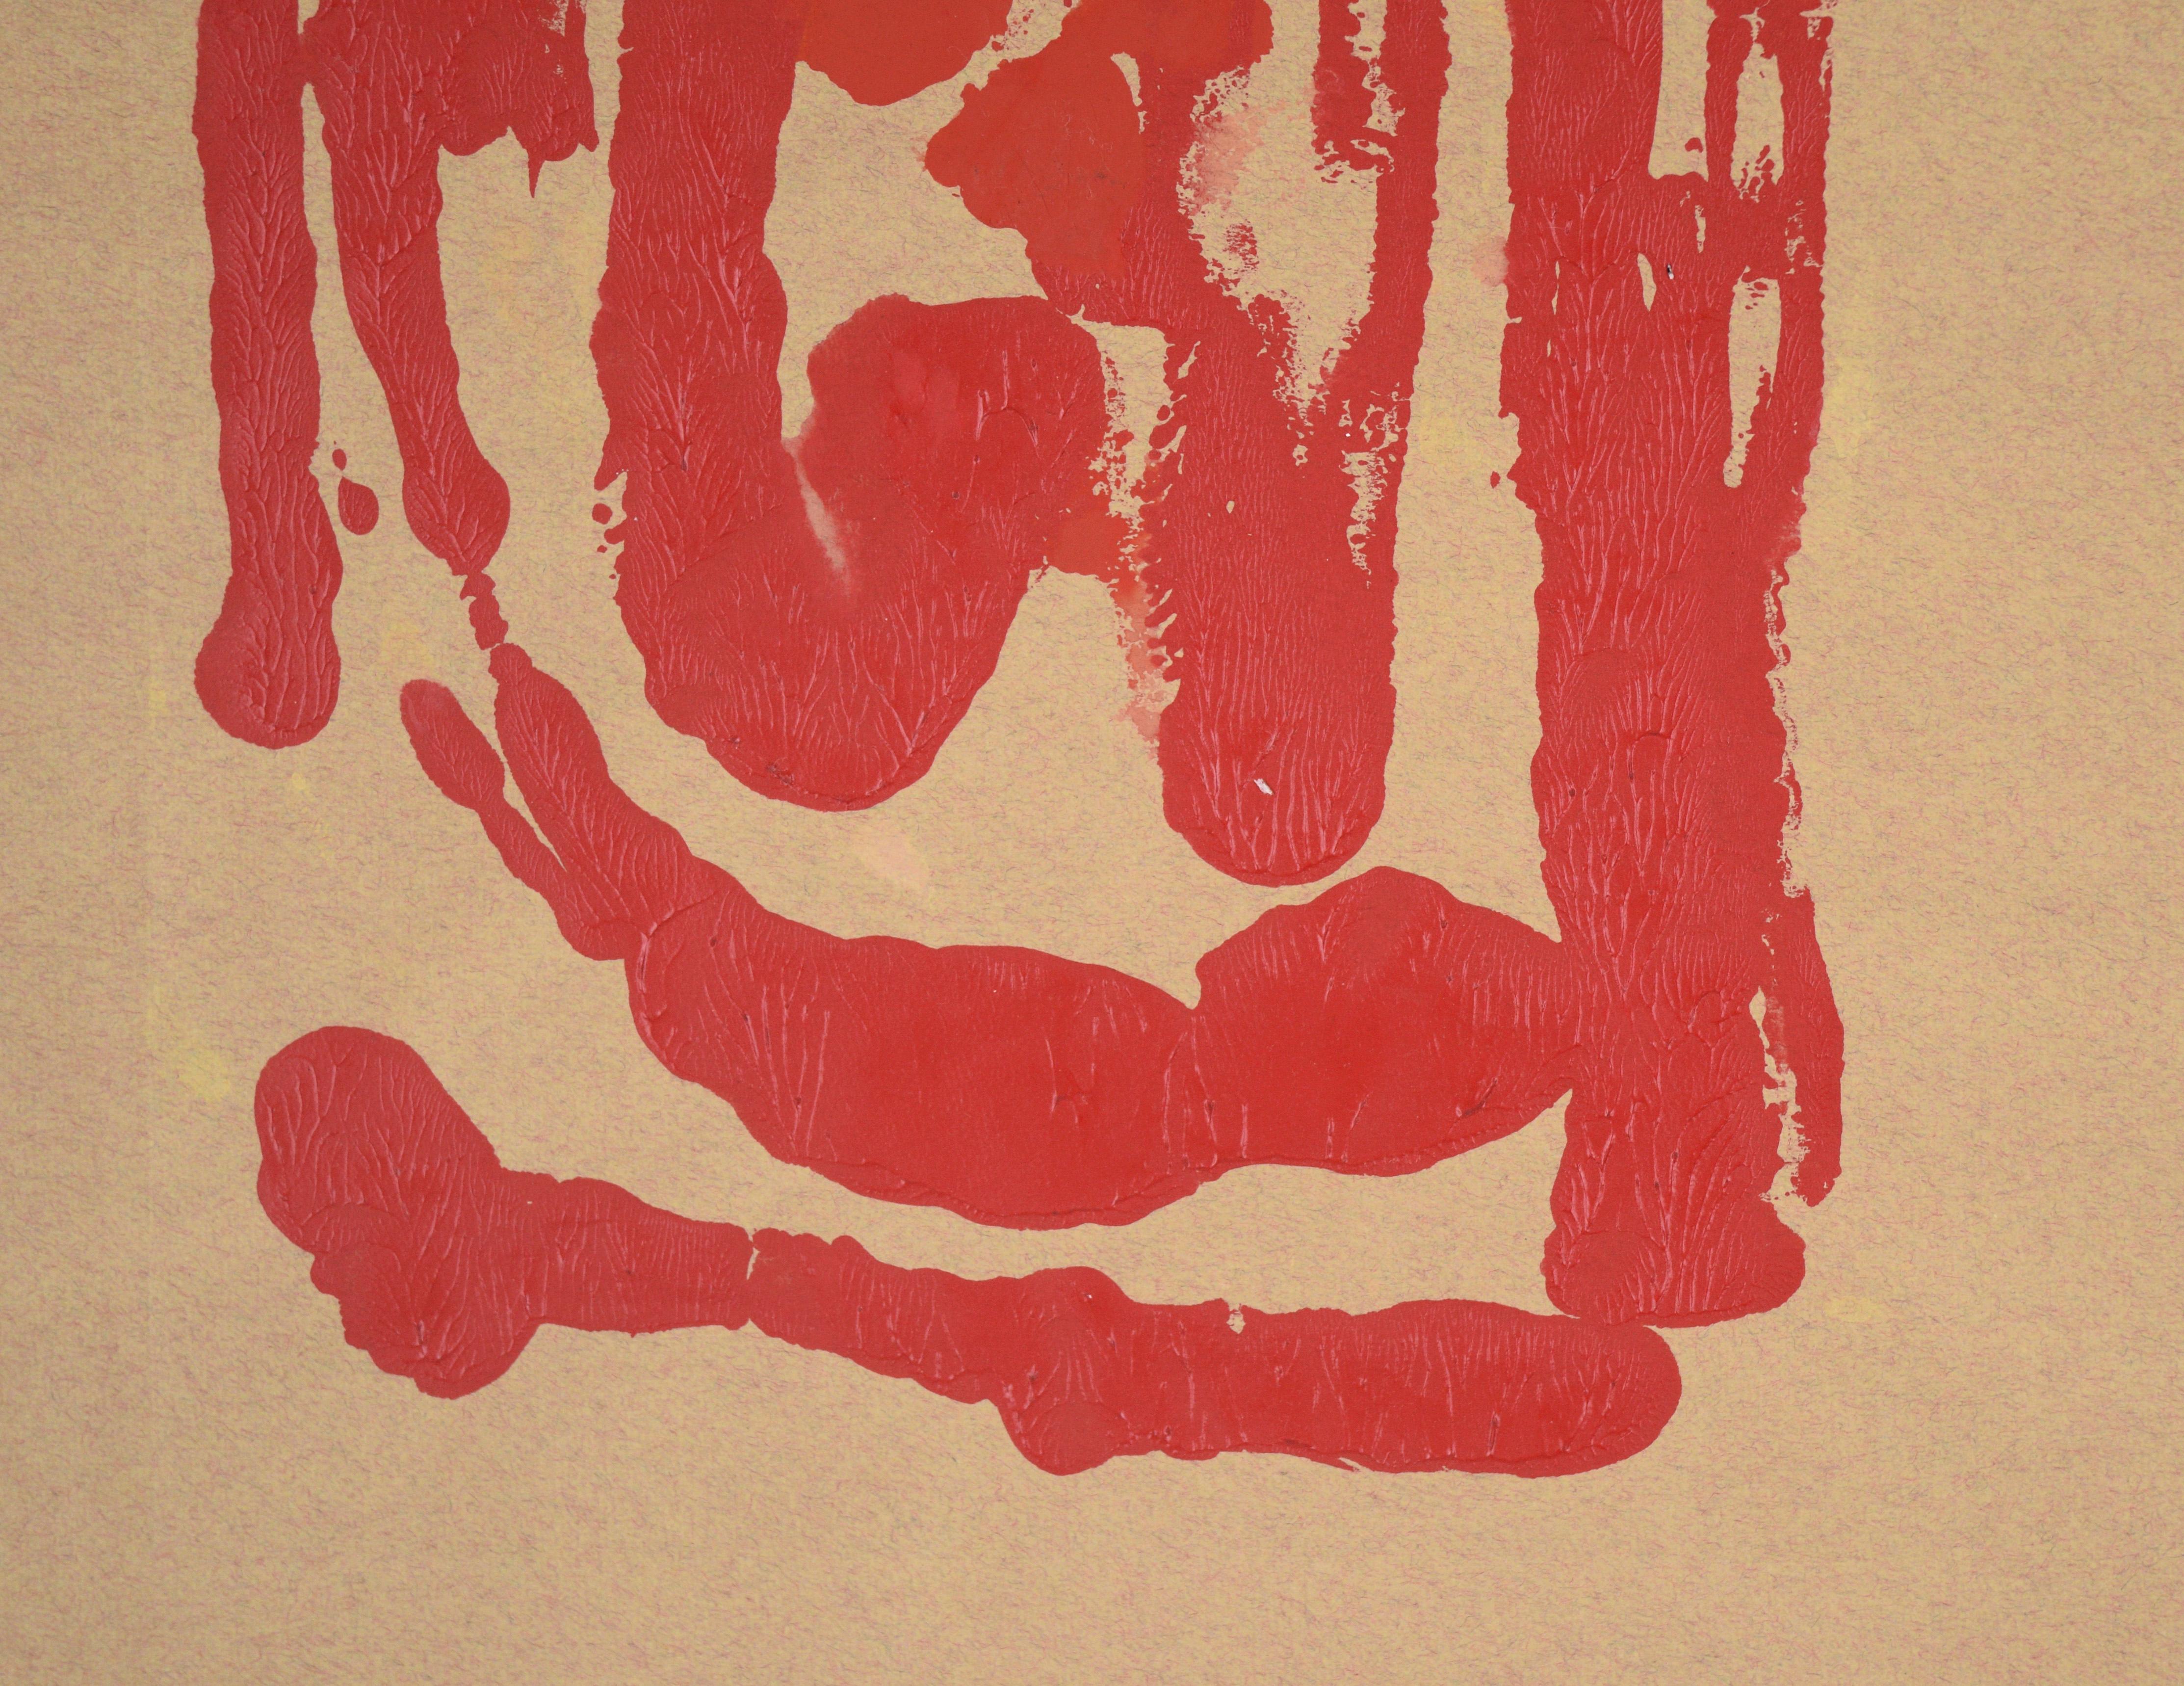 Red Thumbprint - Abstract Expressionist Composition in Acrylic on Paper For Sale 1